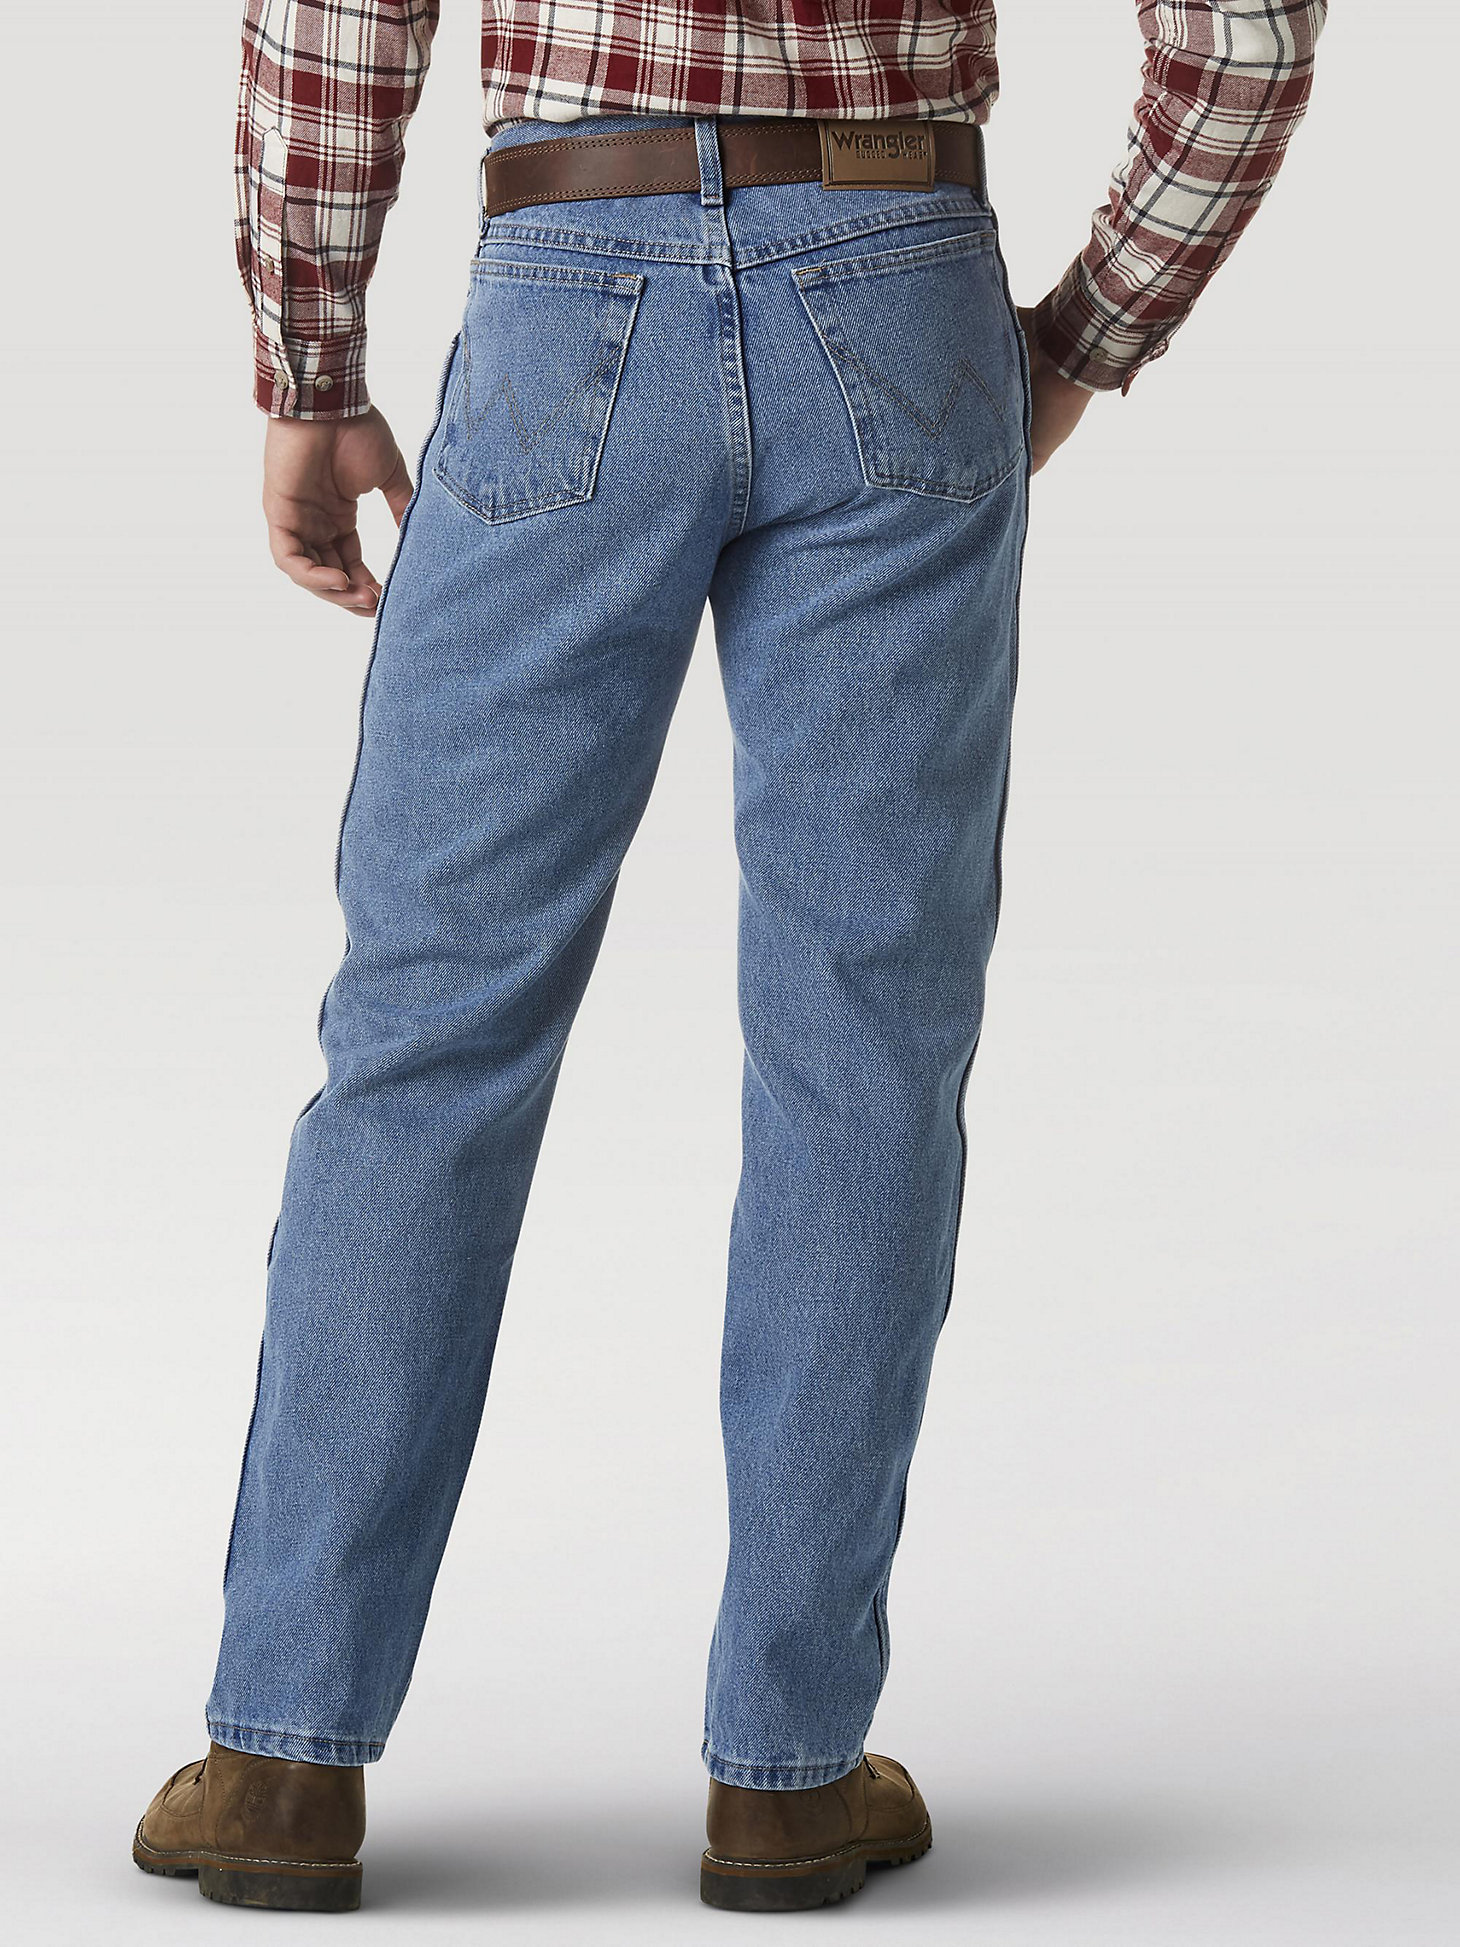 Wrangler Rugged Wear® Classic Fit Jean in Stone Wash alternative view 2